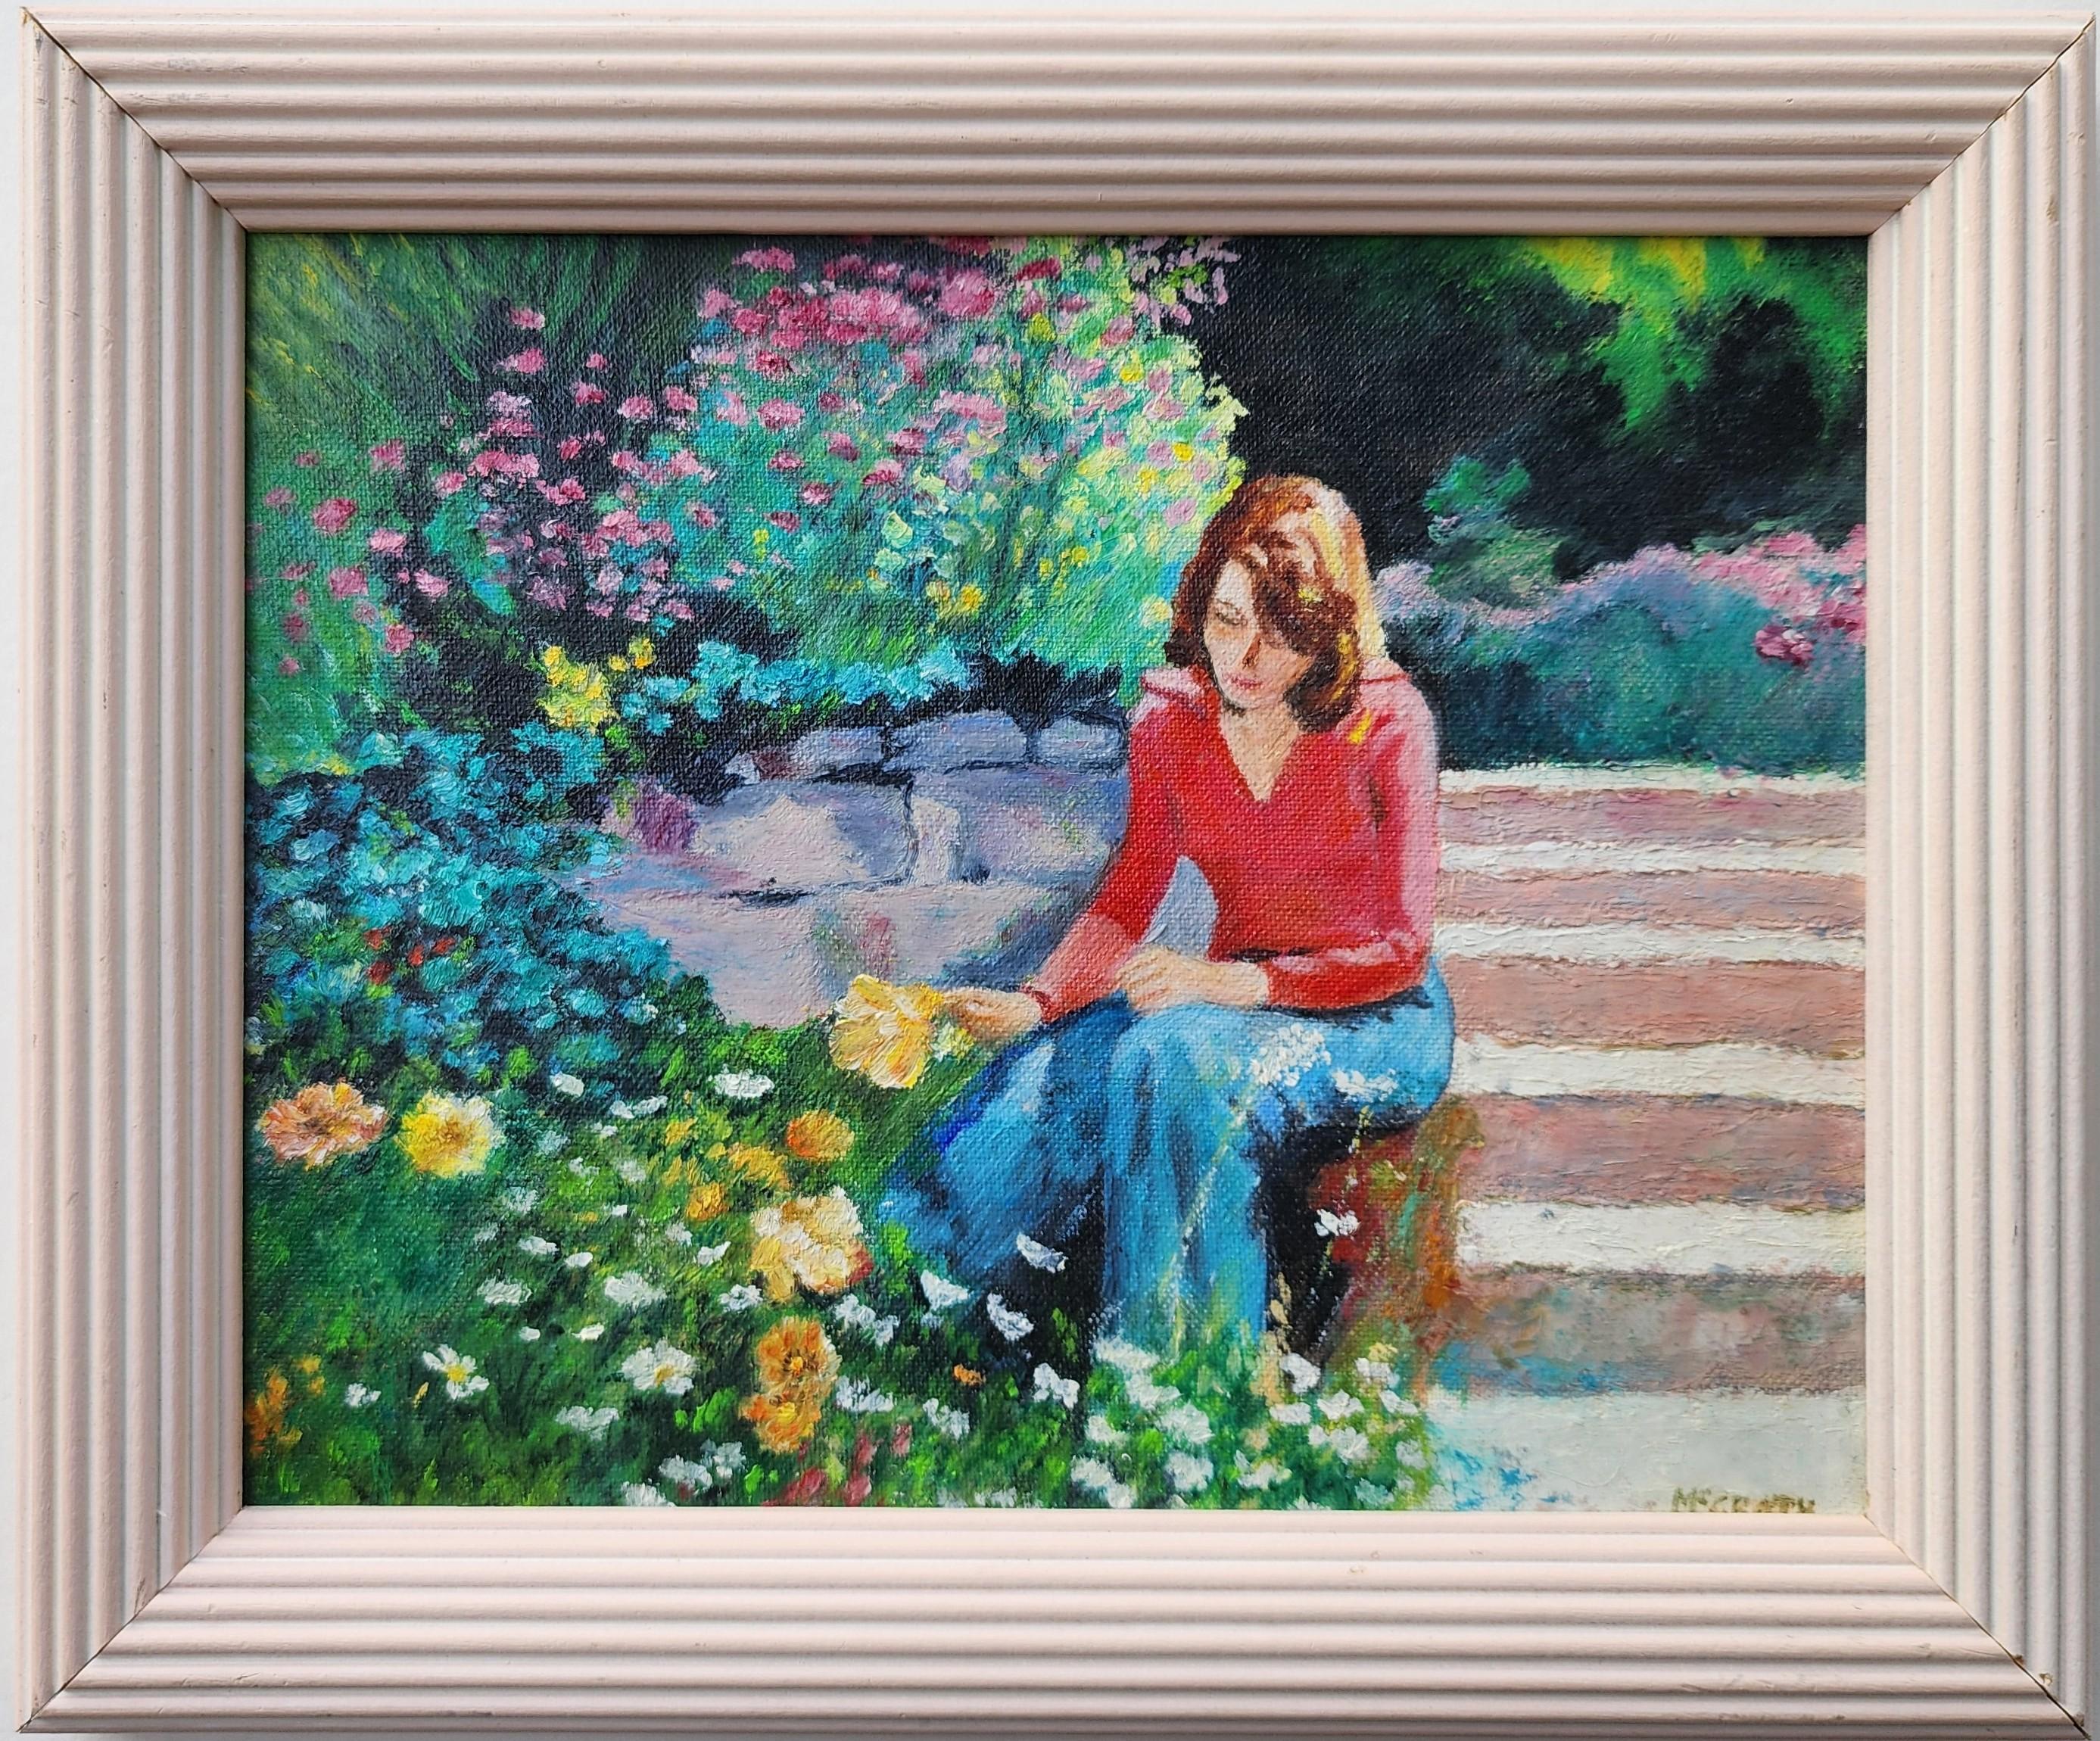 Unknown Portrait Painting - Among the Flowers, Vintage 1970s Portrait of a Girl in a Beautiful Garden